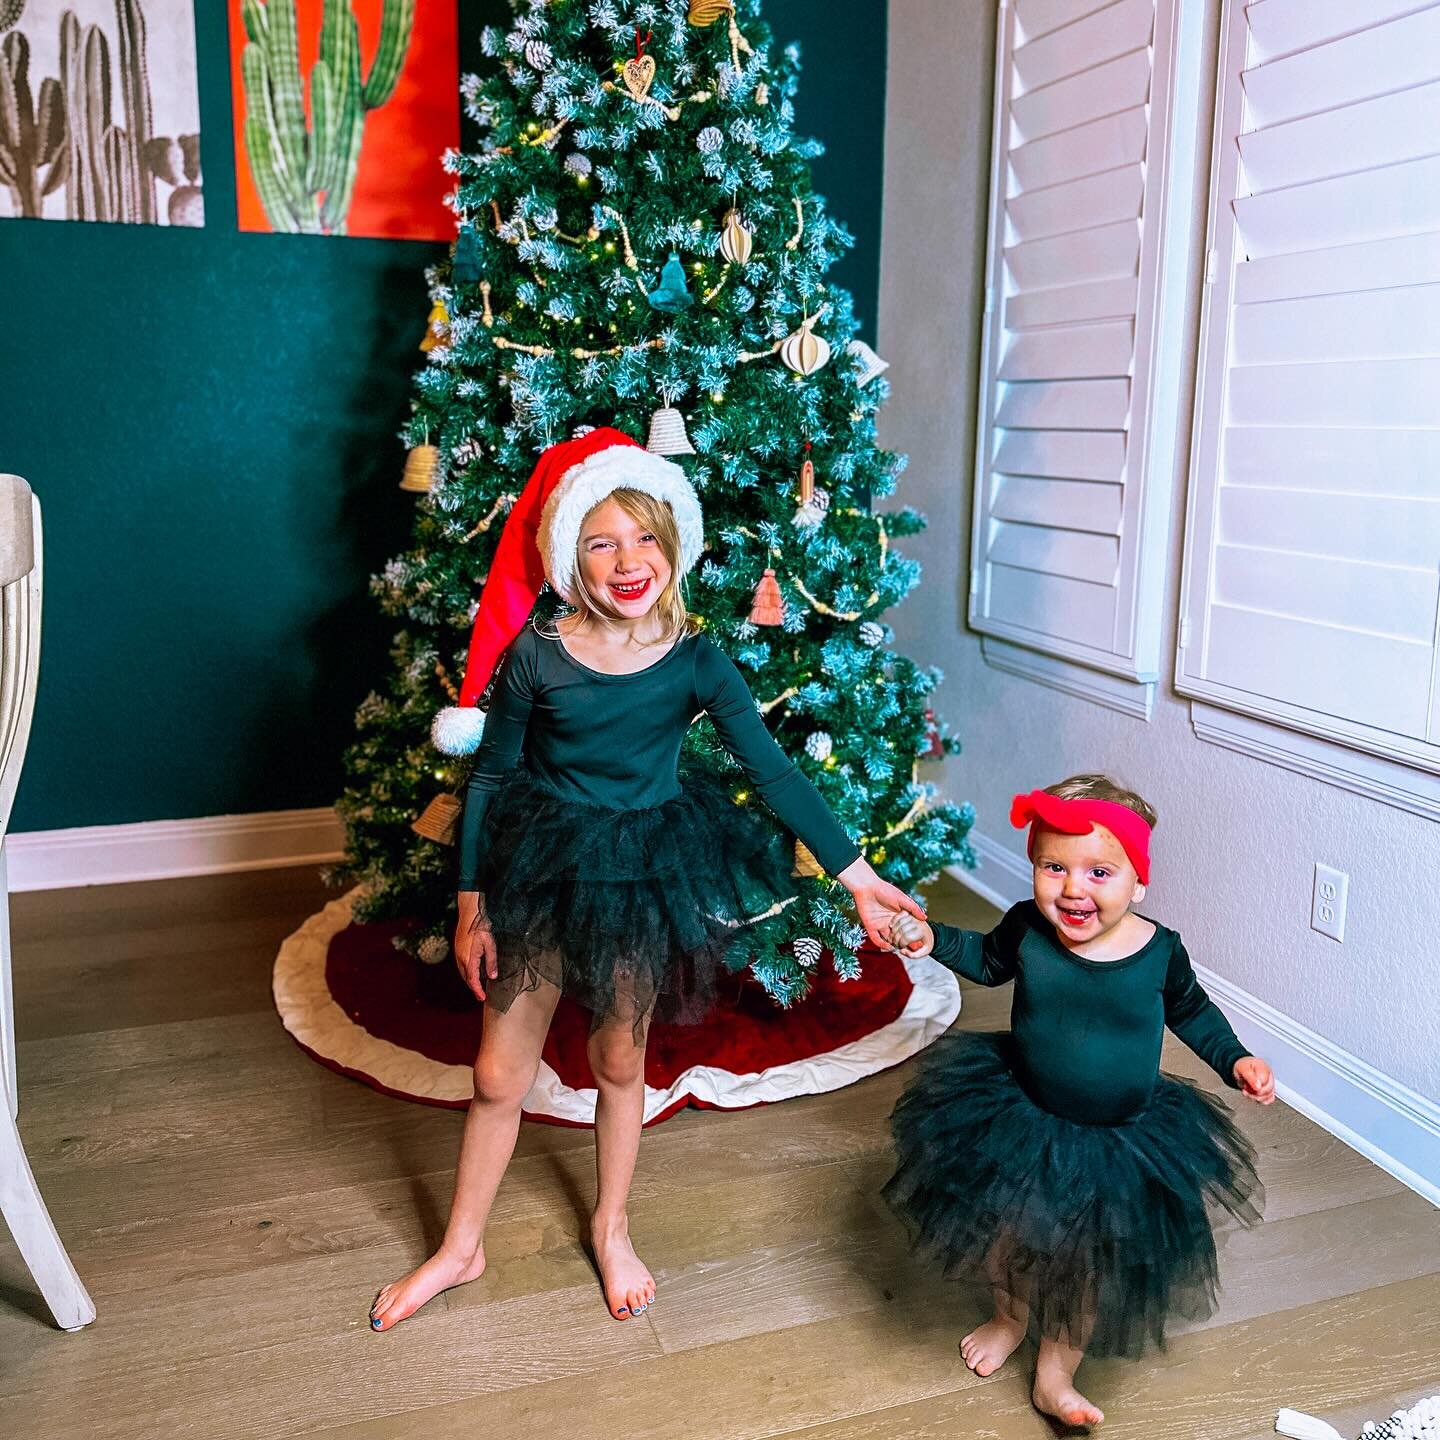 Happy December y&rsquo;all! 🌲Question for elf owners: who named your elf? Ours arrives tomorrow for the first time ever. 😳 

Swipe to see the most wonderful time of the (past) years. 🎶🎄❤️

My helpers have been hard at work decorating trees. Well 